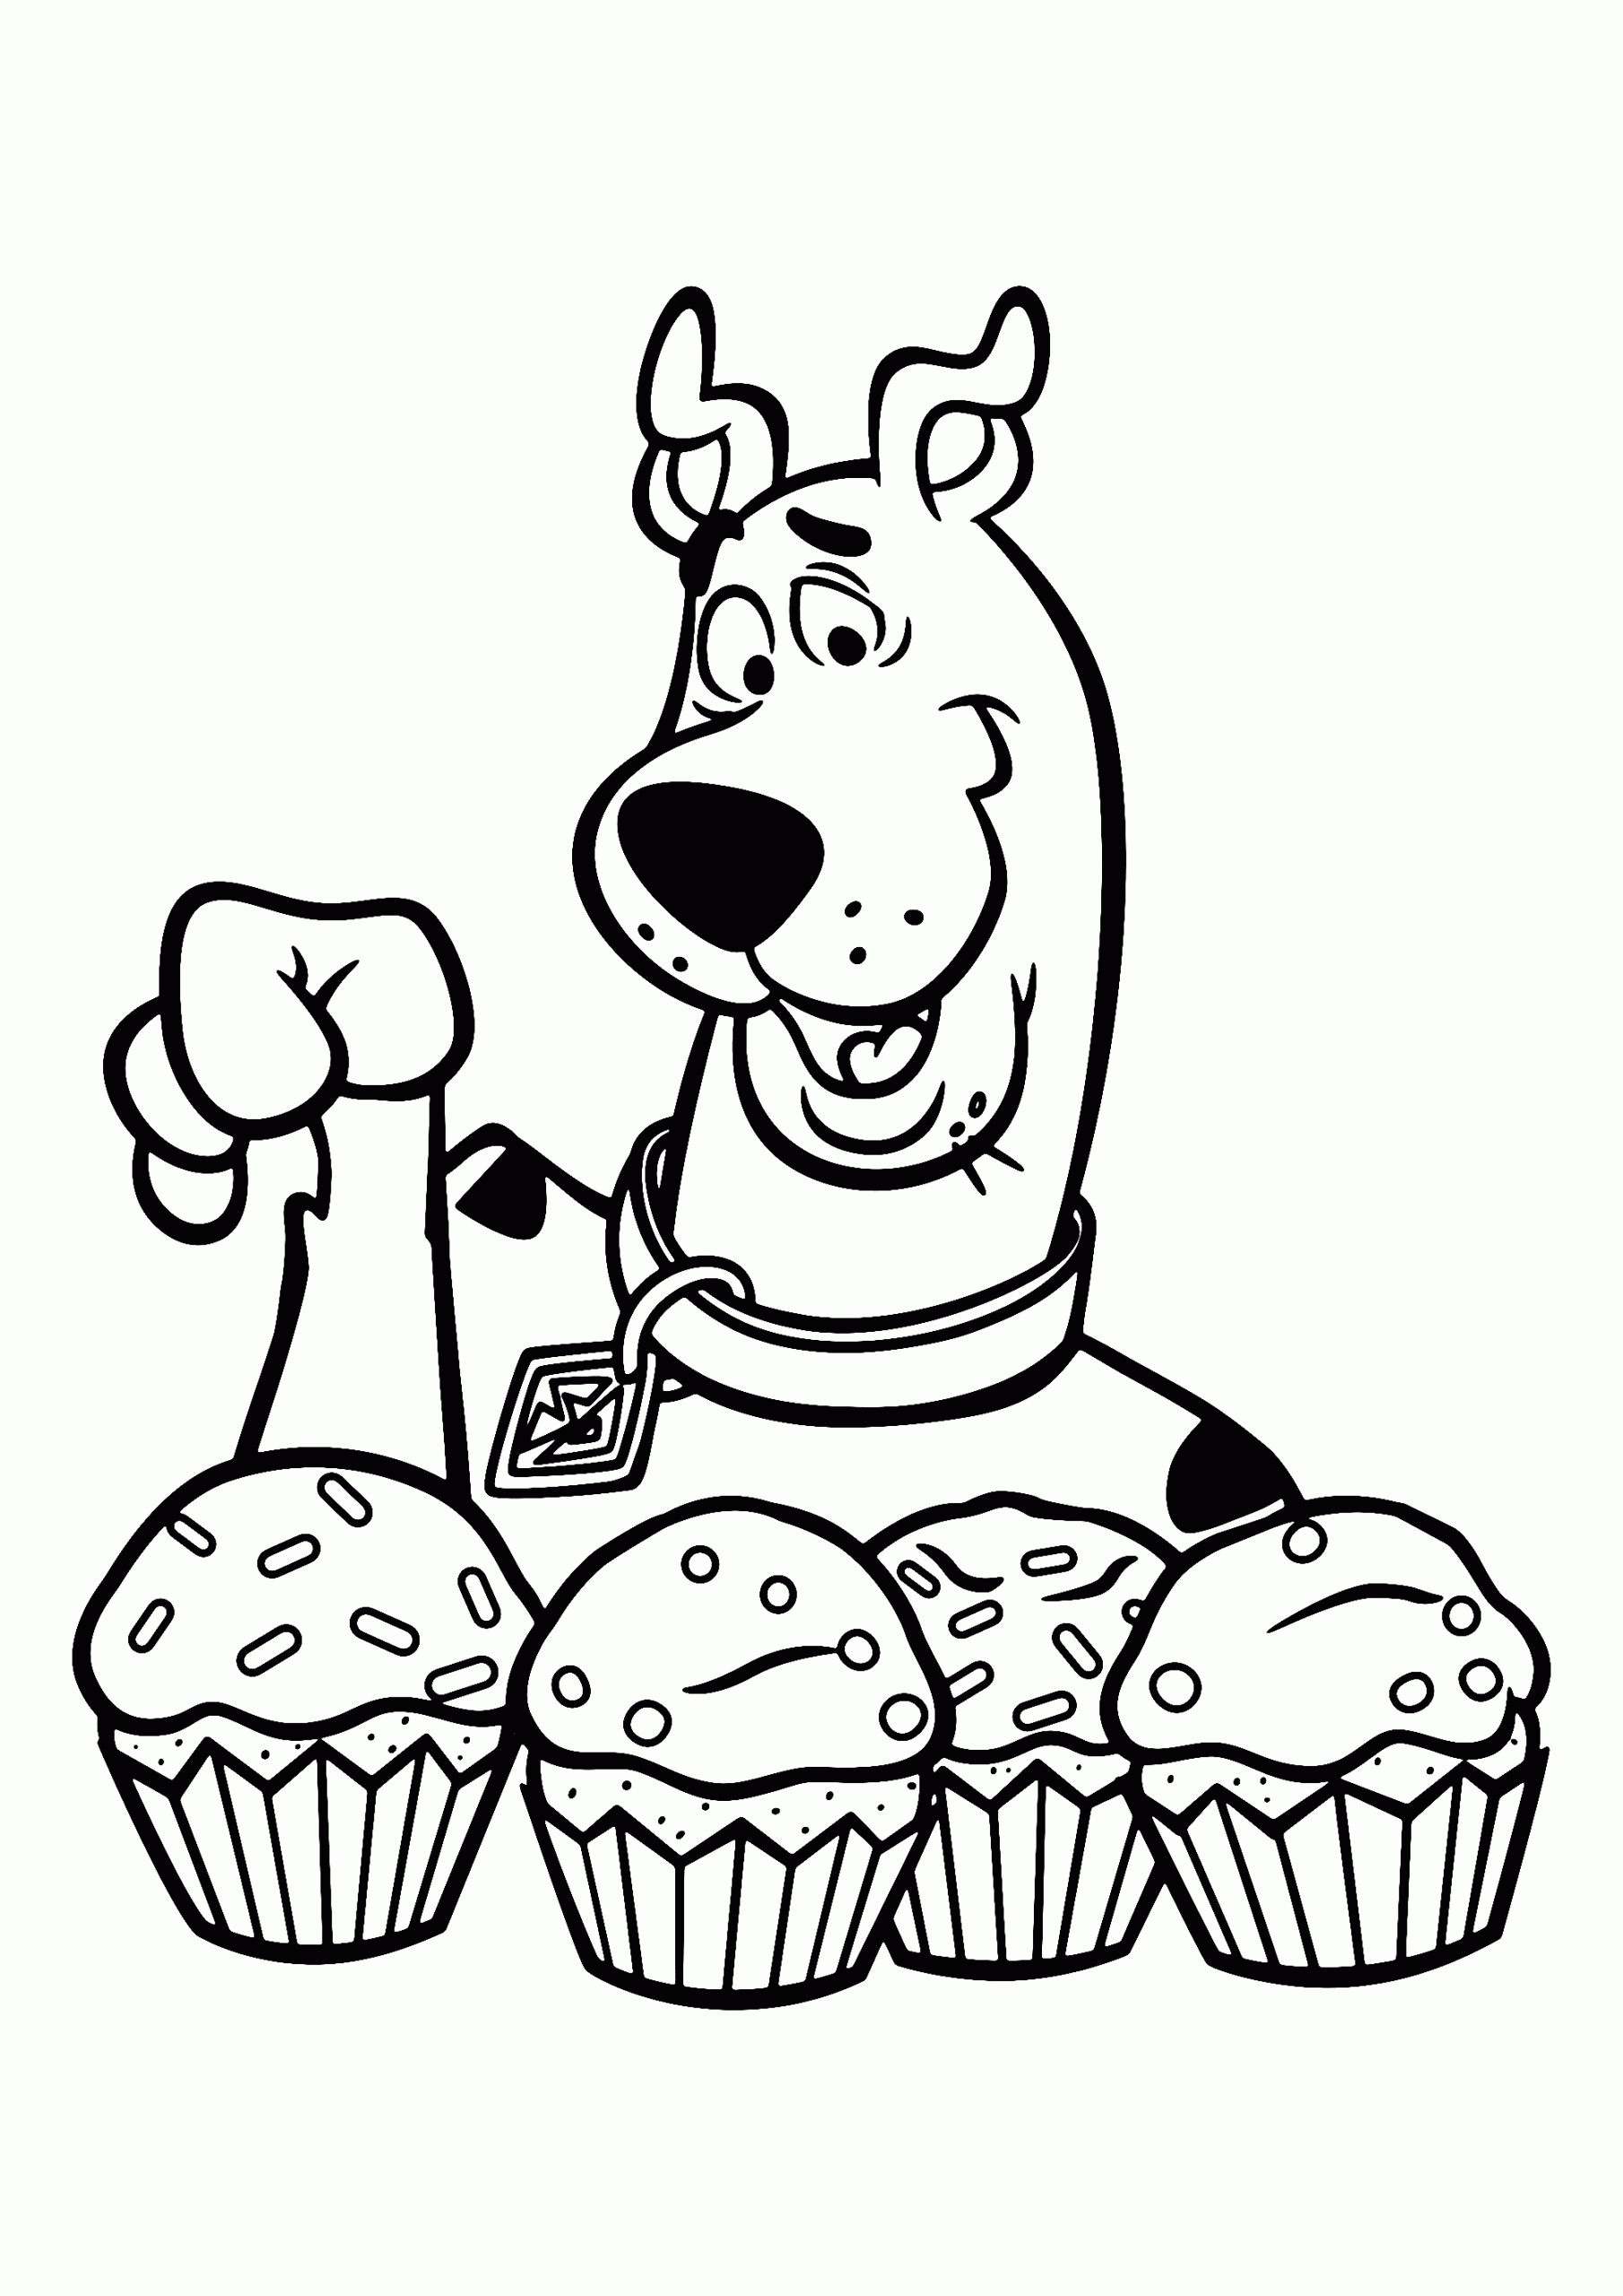 Coloring Page of Foodie Scooby Doo Snack Time Cupcakes